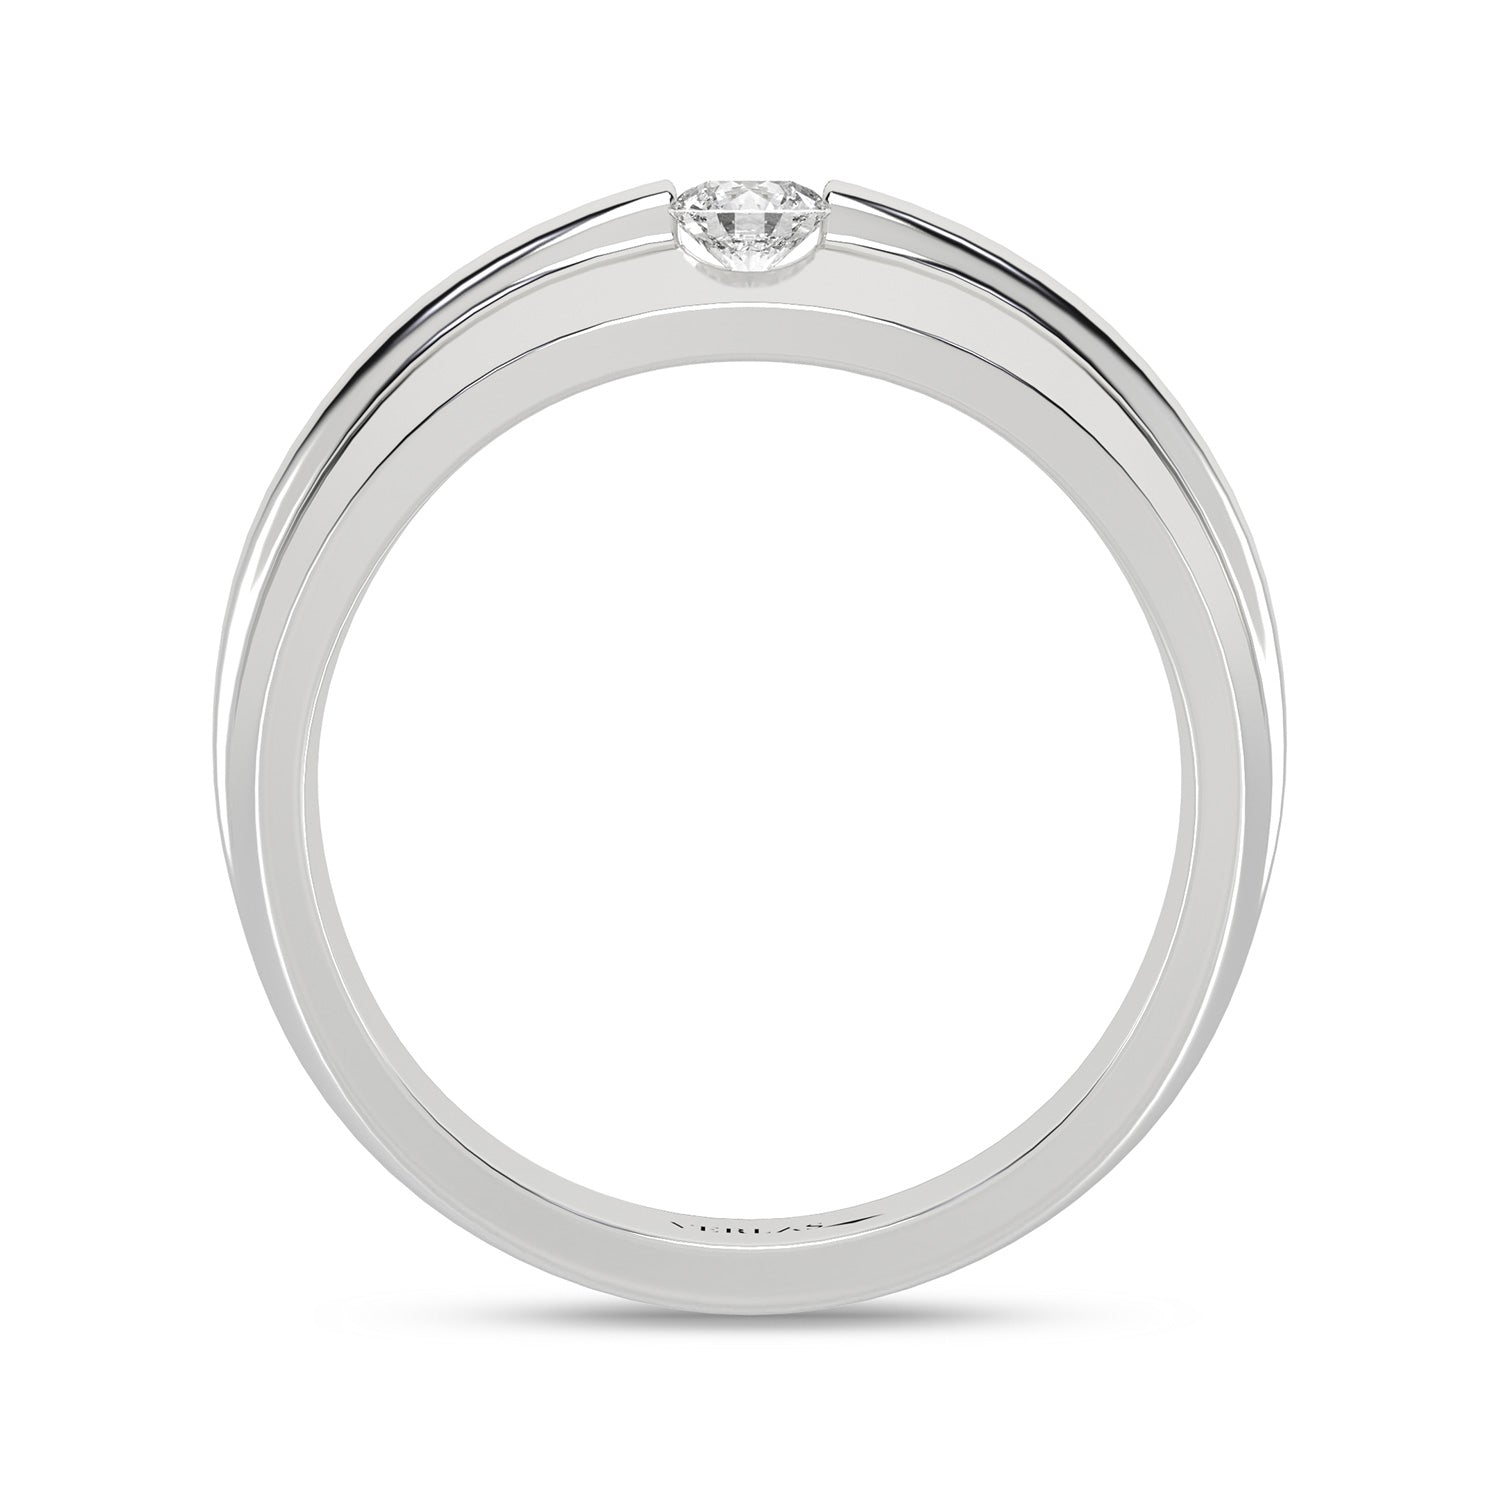 Essential 4-Pronged Round Ring_Product Angle_1/5 Ct. - 3